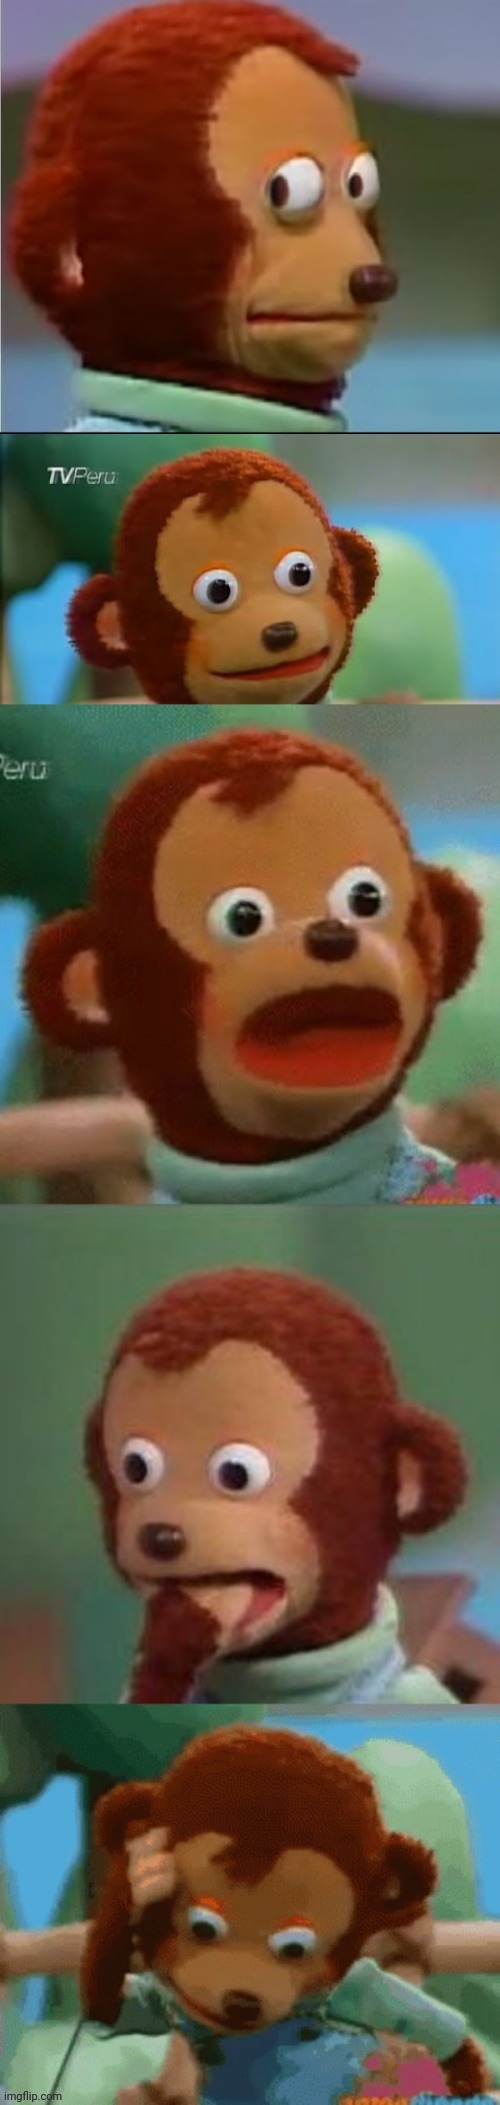 Surprised monkey puppet | image tagged in surprised monkey puppet | made w/ Imgflip meme maker